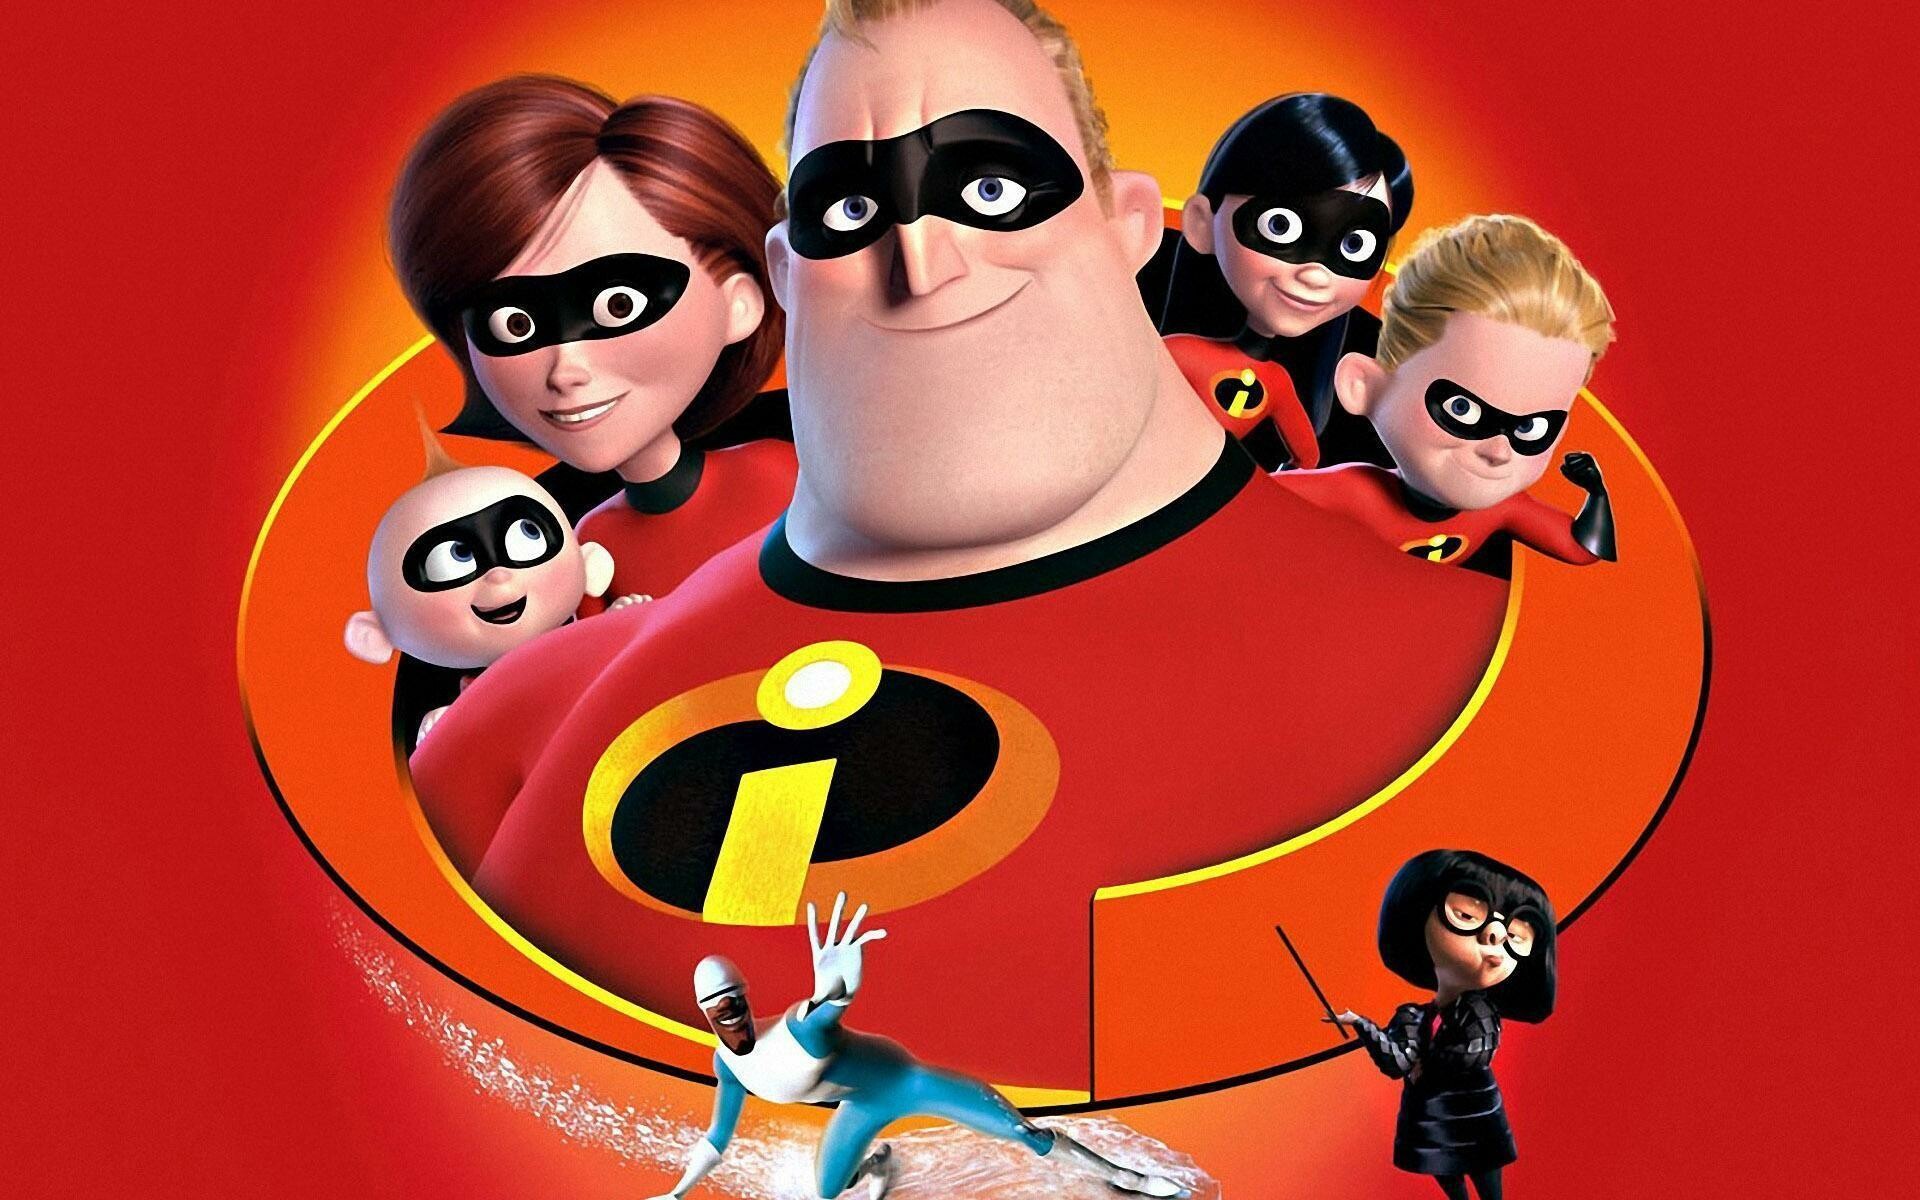 The Incredibles: Pixar-Disney film that received widespread acclaim from critics and audiences, with praise for its animation, screenplay, action sequences, humor, voice acting, themes, music, and appeal to different age groups. 1920x1200 HD Wallpaper.